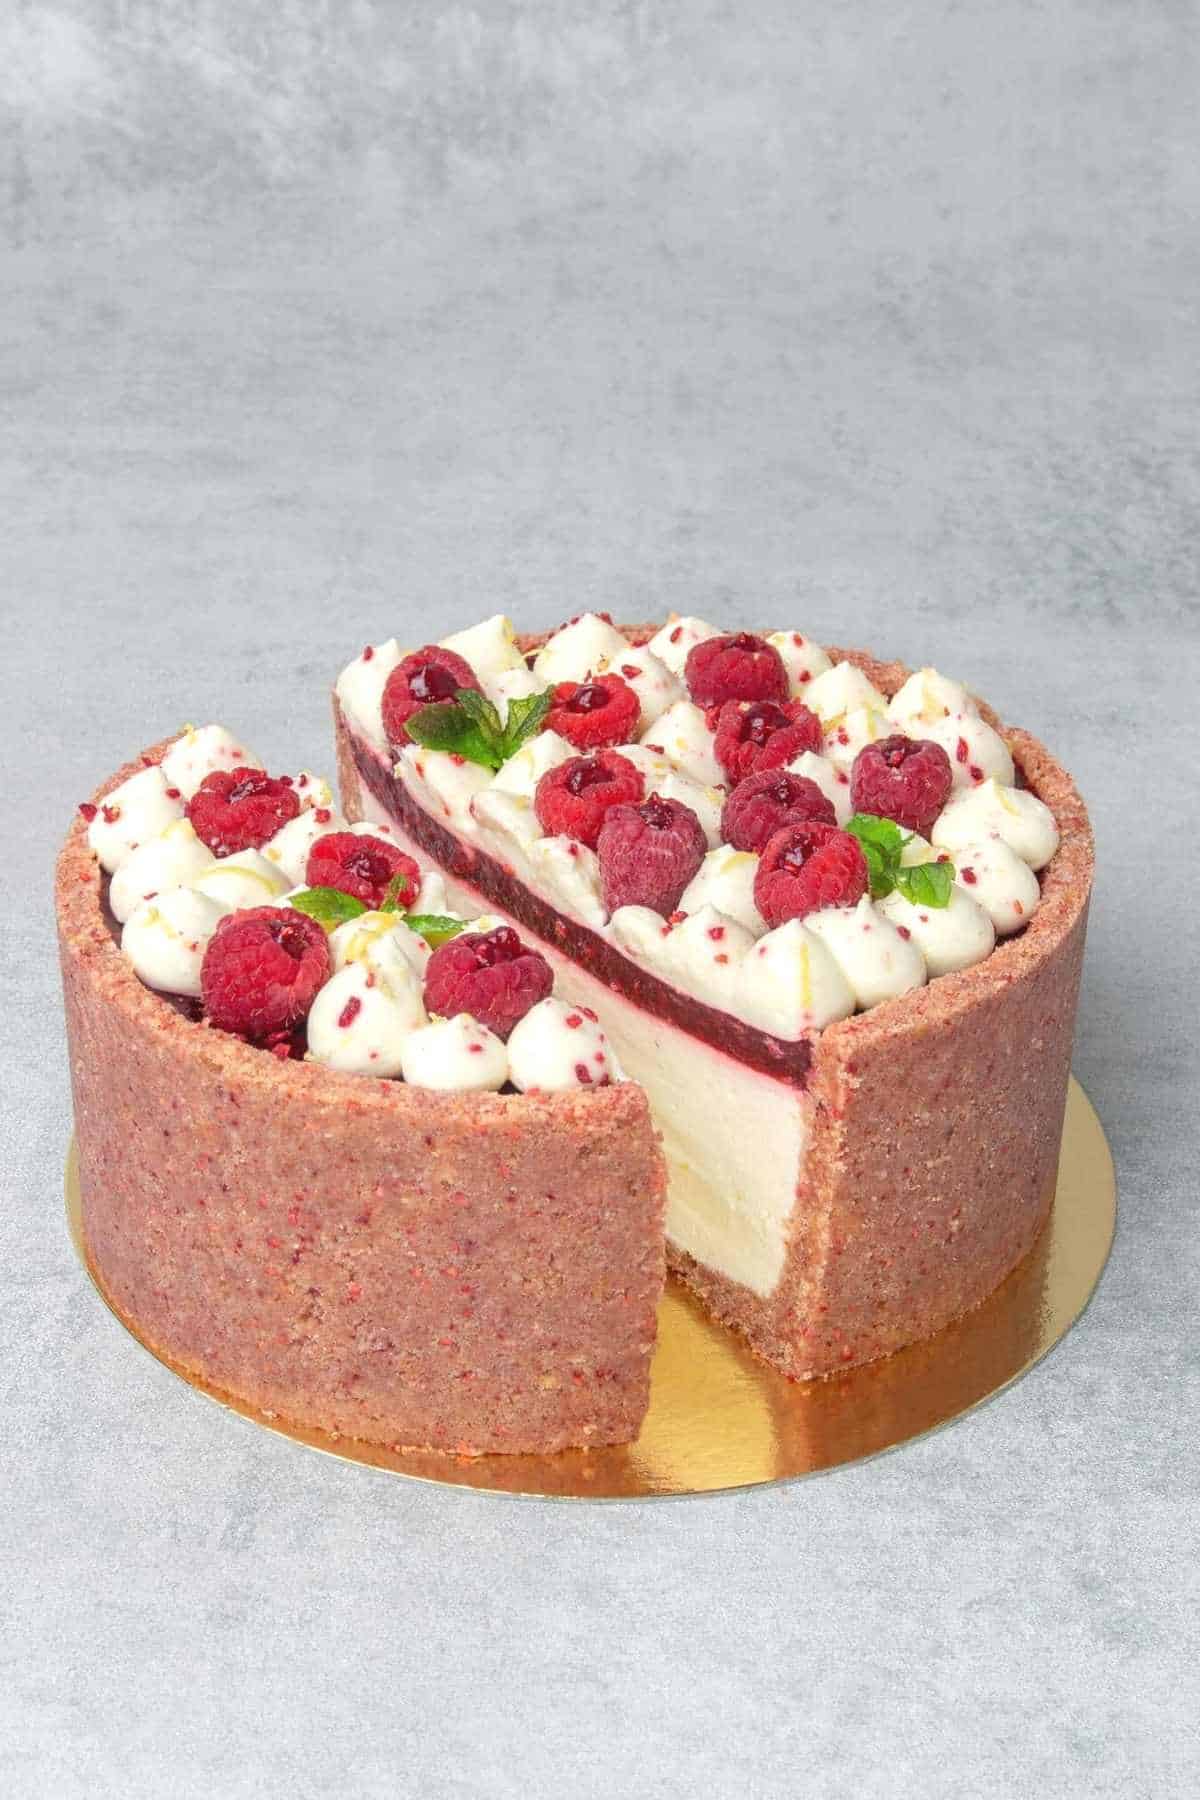 no bake raspberry cheesecake sliced in the middle to reveal the layers from inside